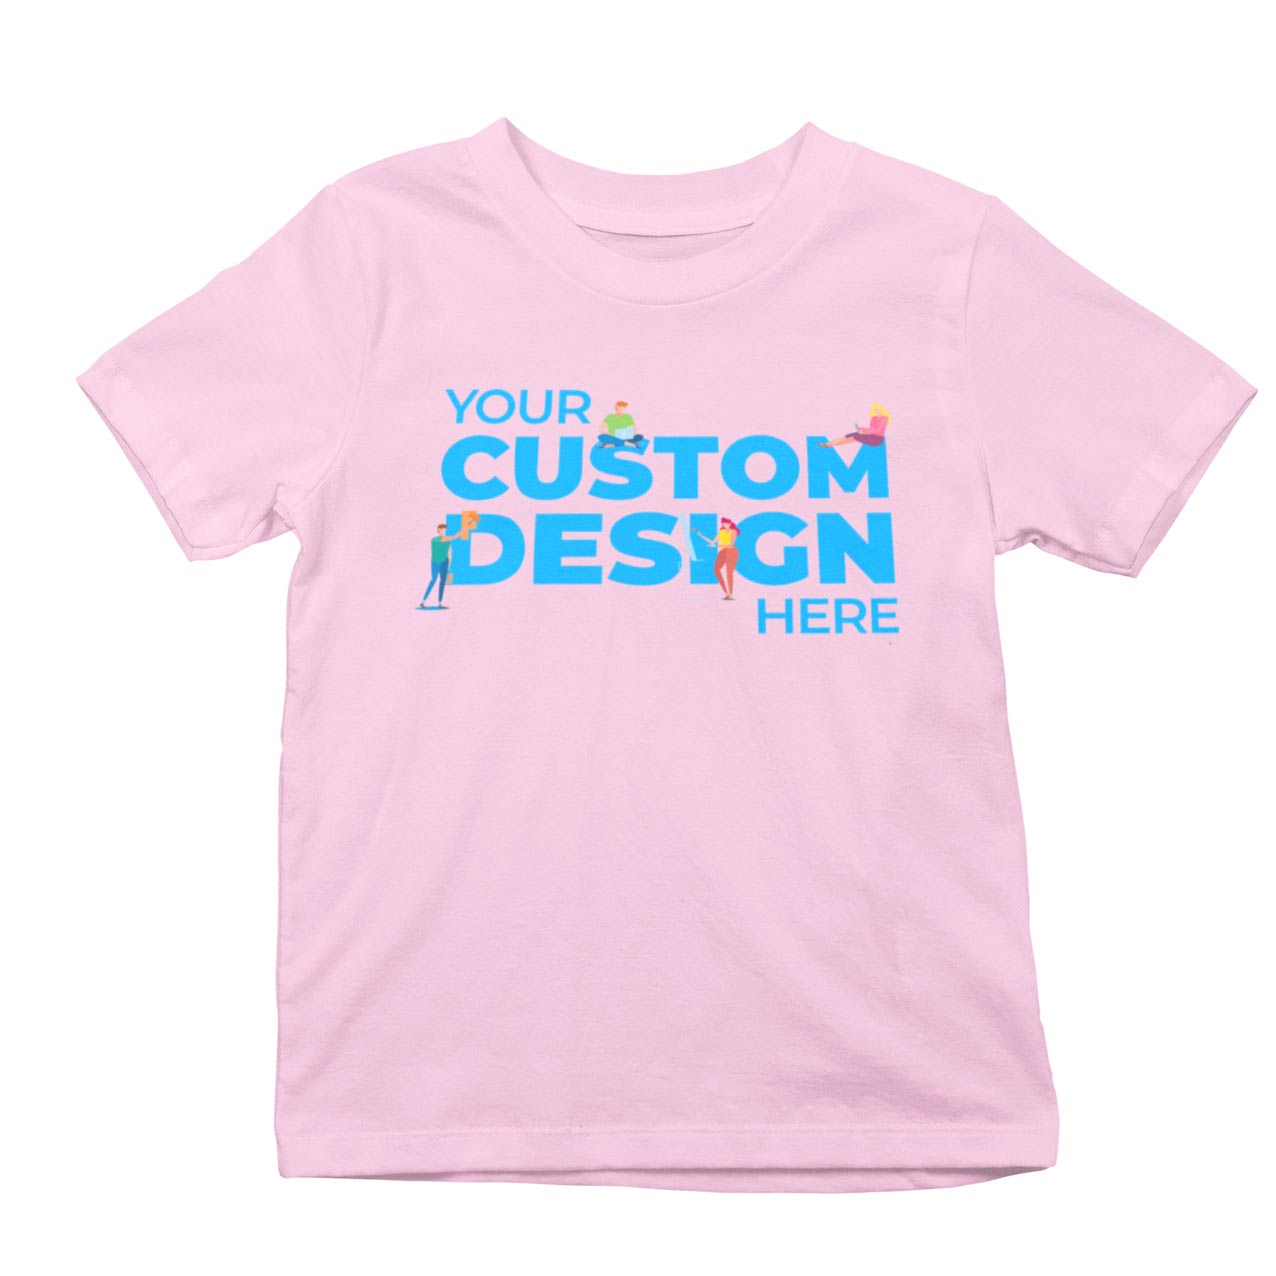 custom customisable t-shirt india baby pink t-shirt black  tshirts baby pink tshirt the banyan tee tbt basics buy custom customisable tshirts india kids boys girls for 12 year old 5 year old 10 13 new born